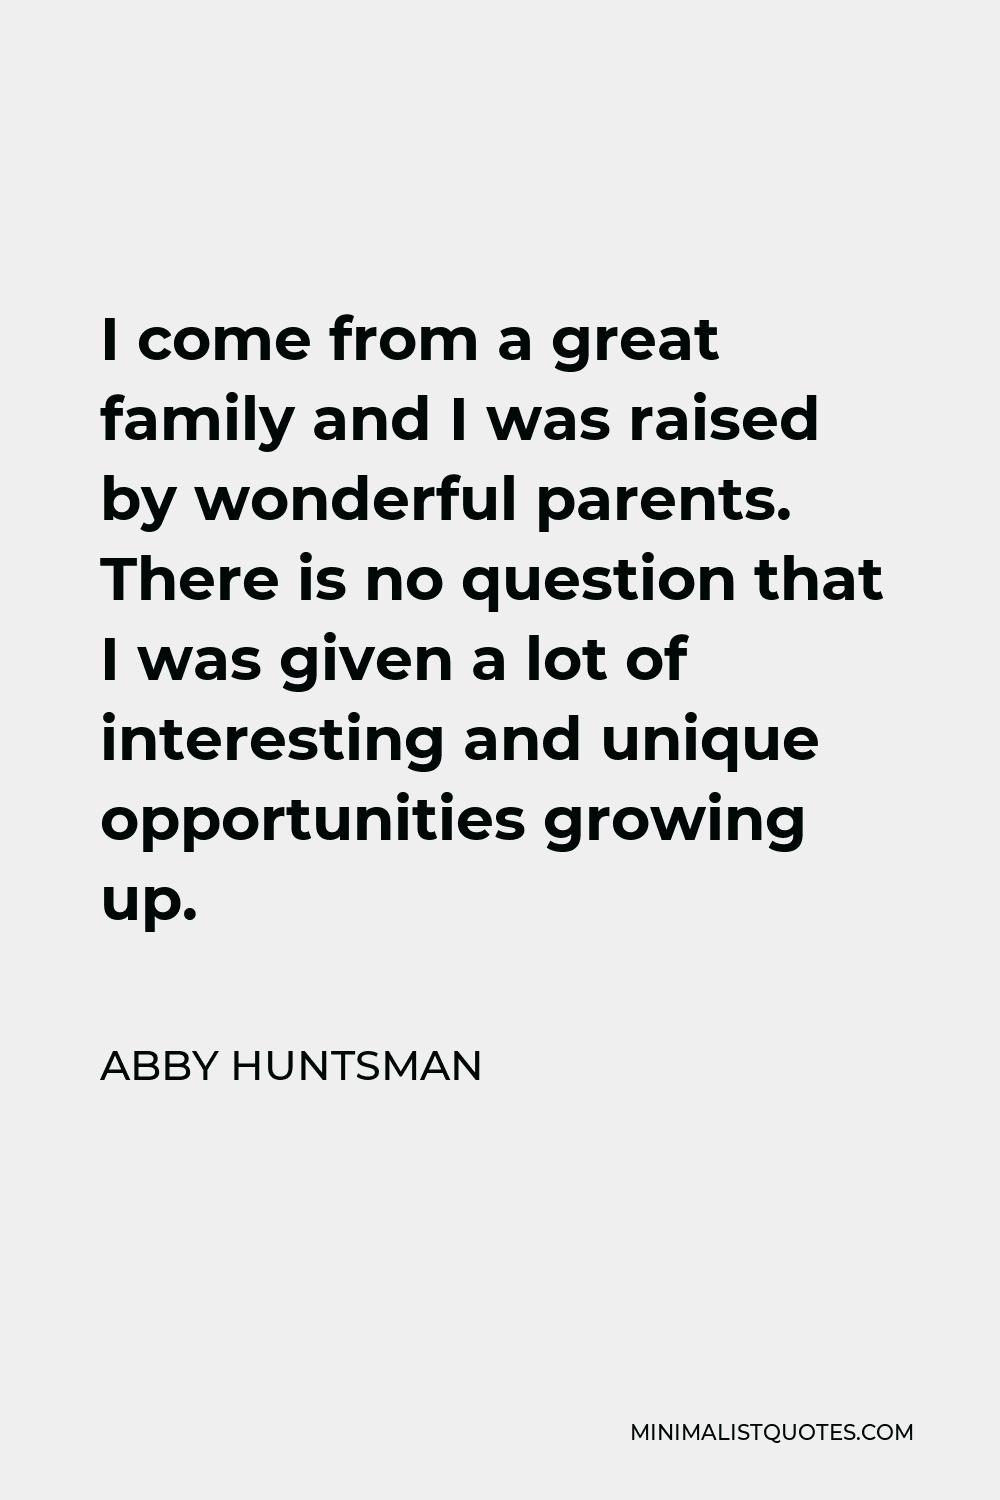 Abby Huntsman Quote - I come from a great family and I was raised by wonderful parents. There is no question that I was given a lot of interesting and unique opportunities growing up.